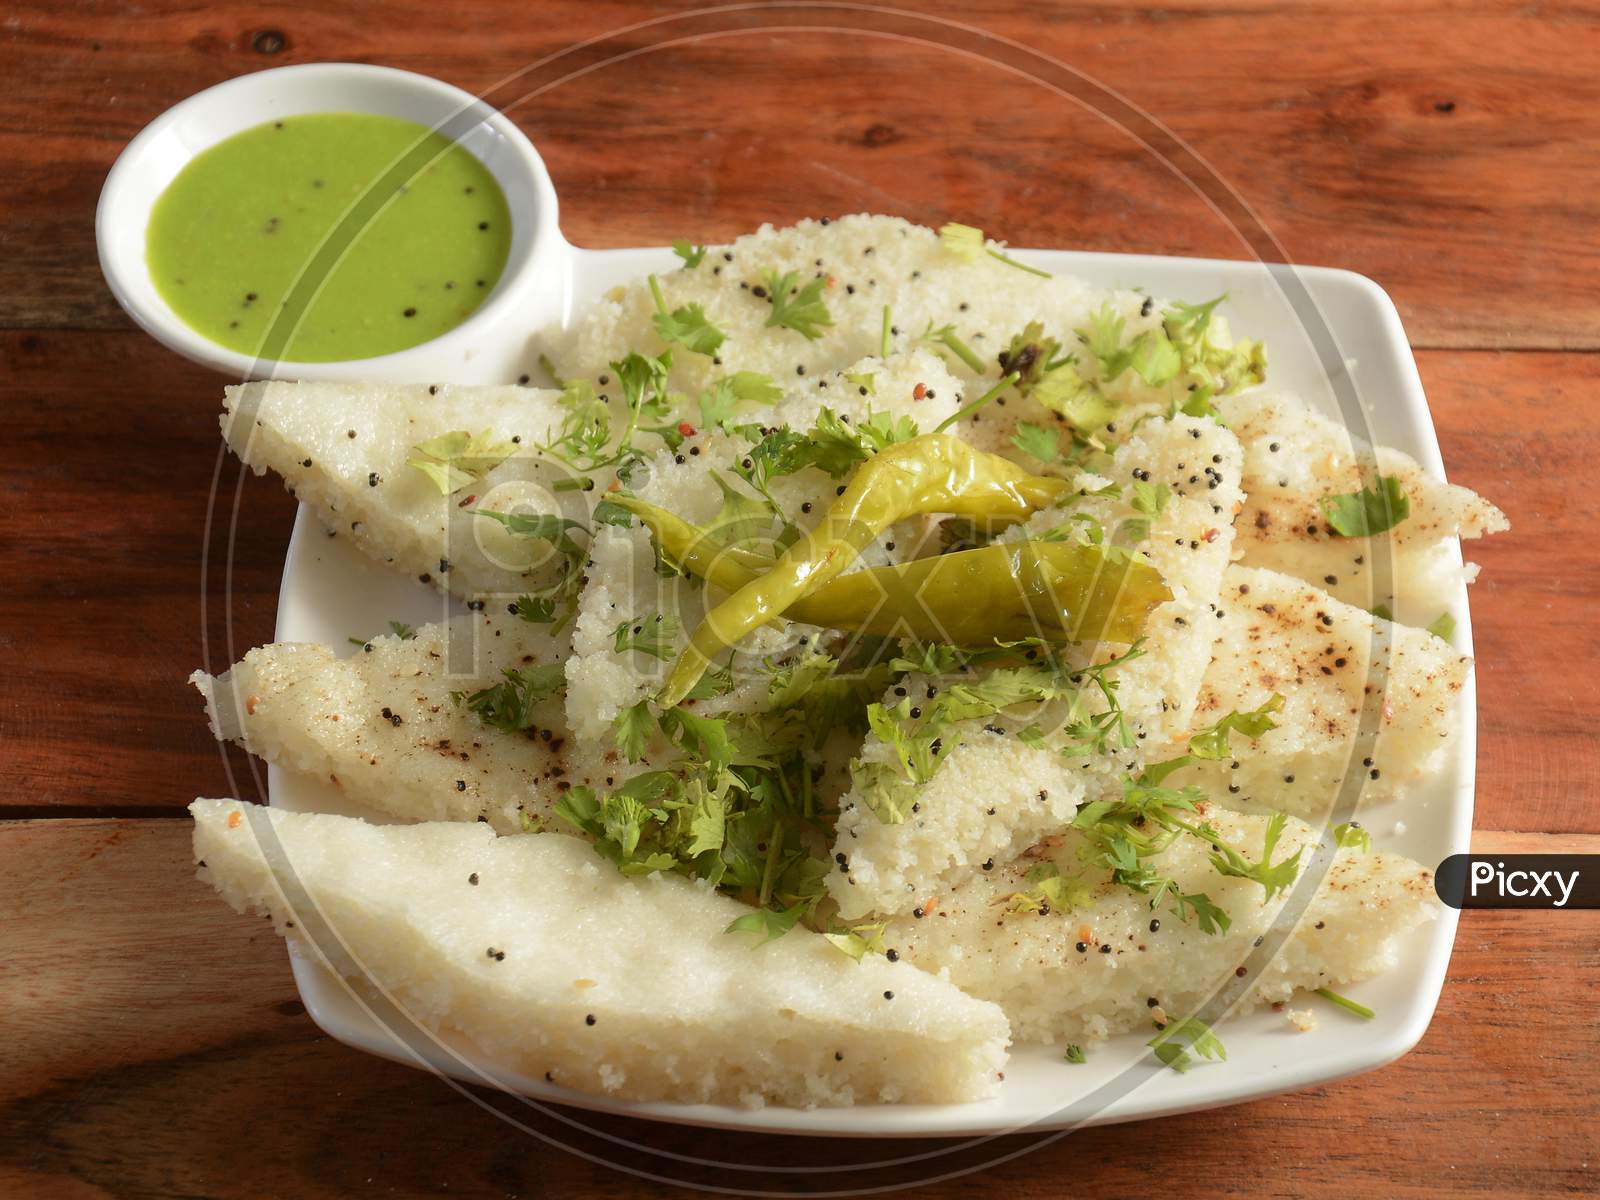 Khaman White Dhokla Made Up Of Rice Or Urad Dal Is A Popular Breakfast Or Snacks Recipe From Gujarat, India, Served With Green Chutney And Fried Chilli.. Selective Focus